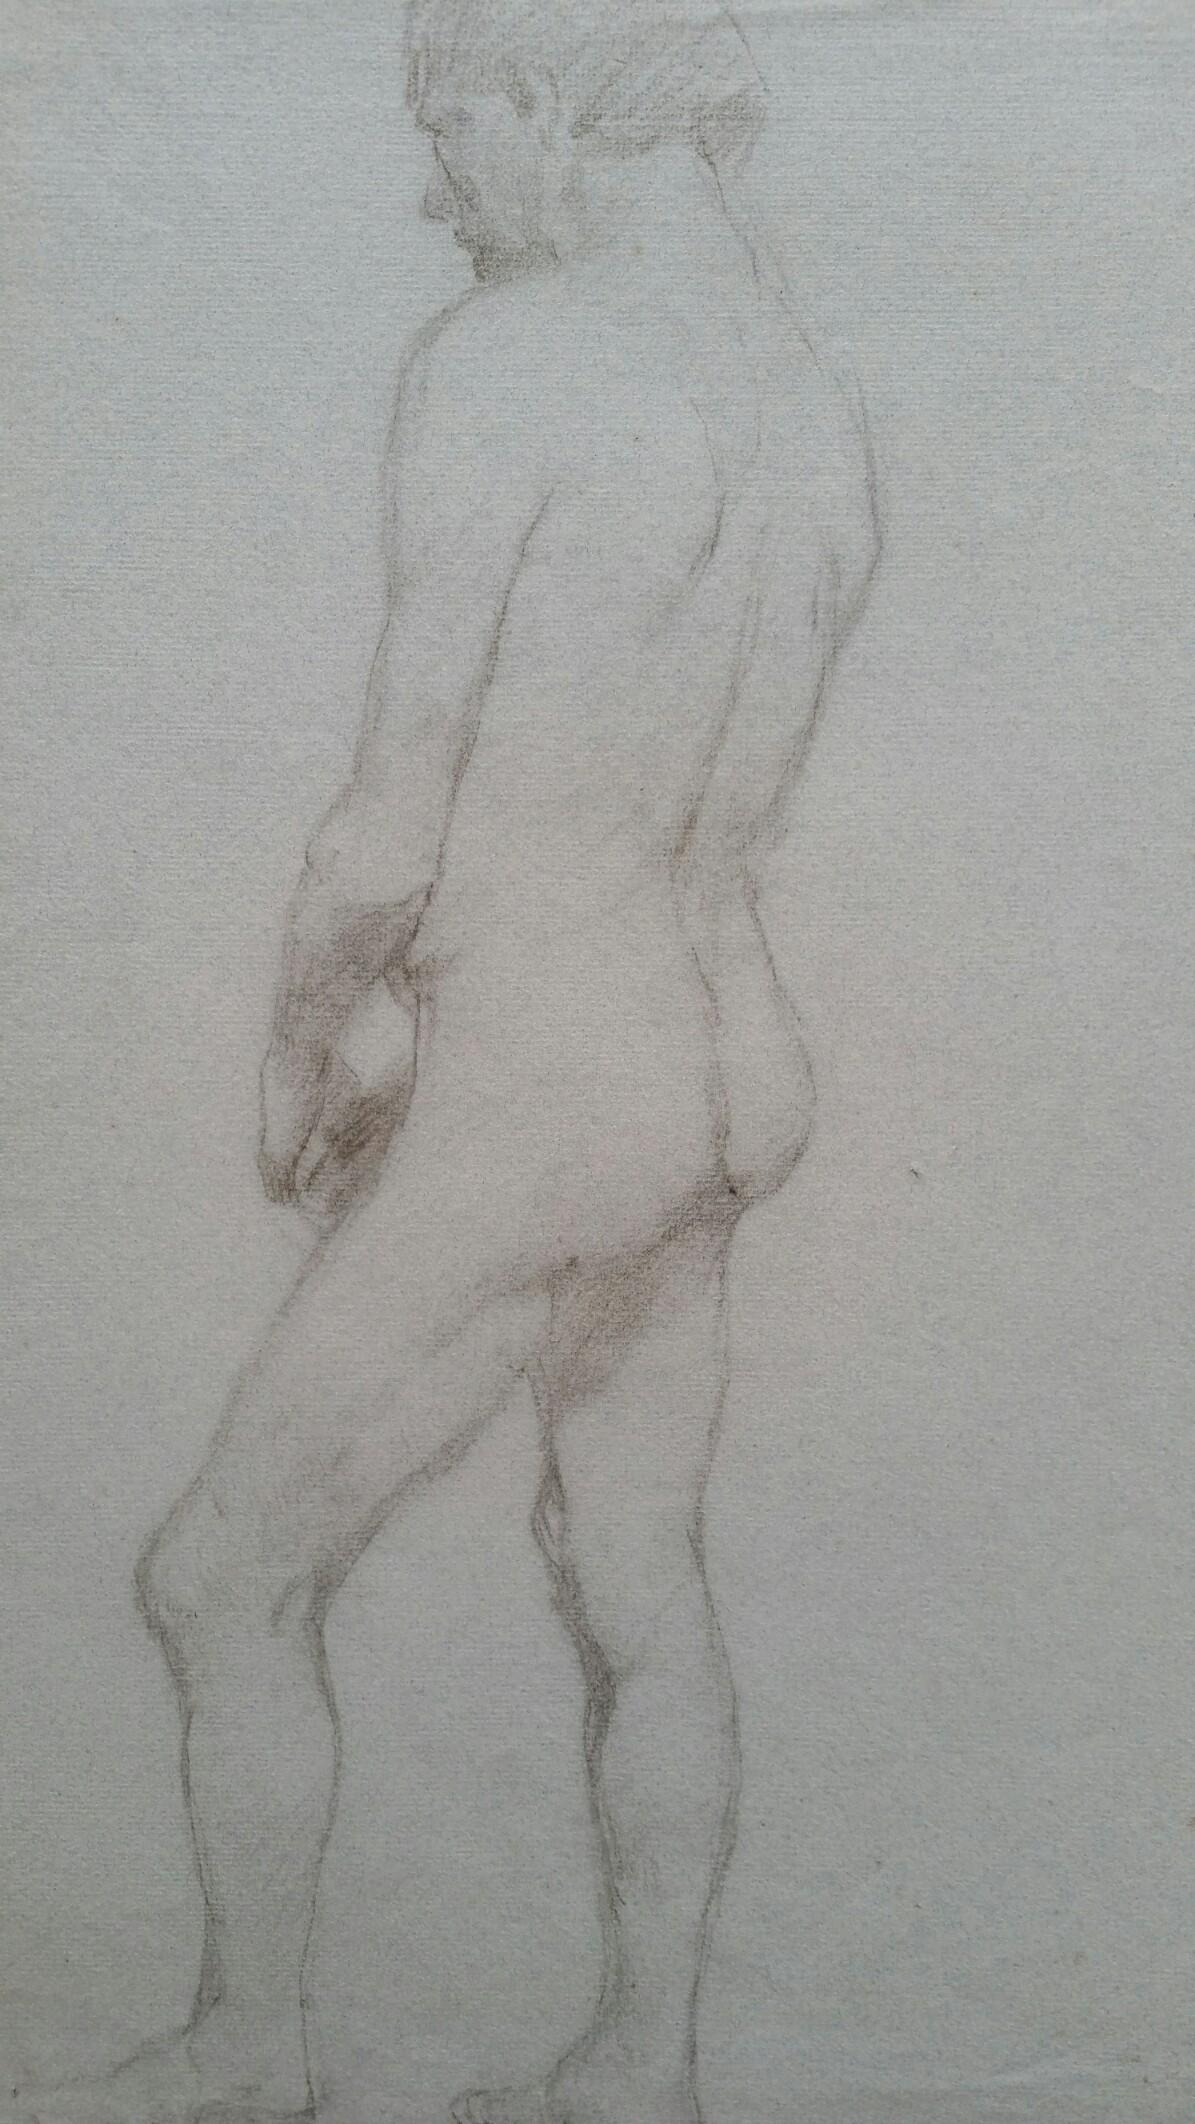 English Graphite Portrait Sketch of Male Nude, Back View - Art by Henry George Moon